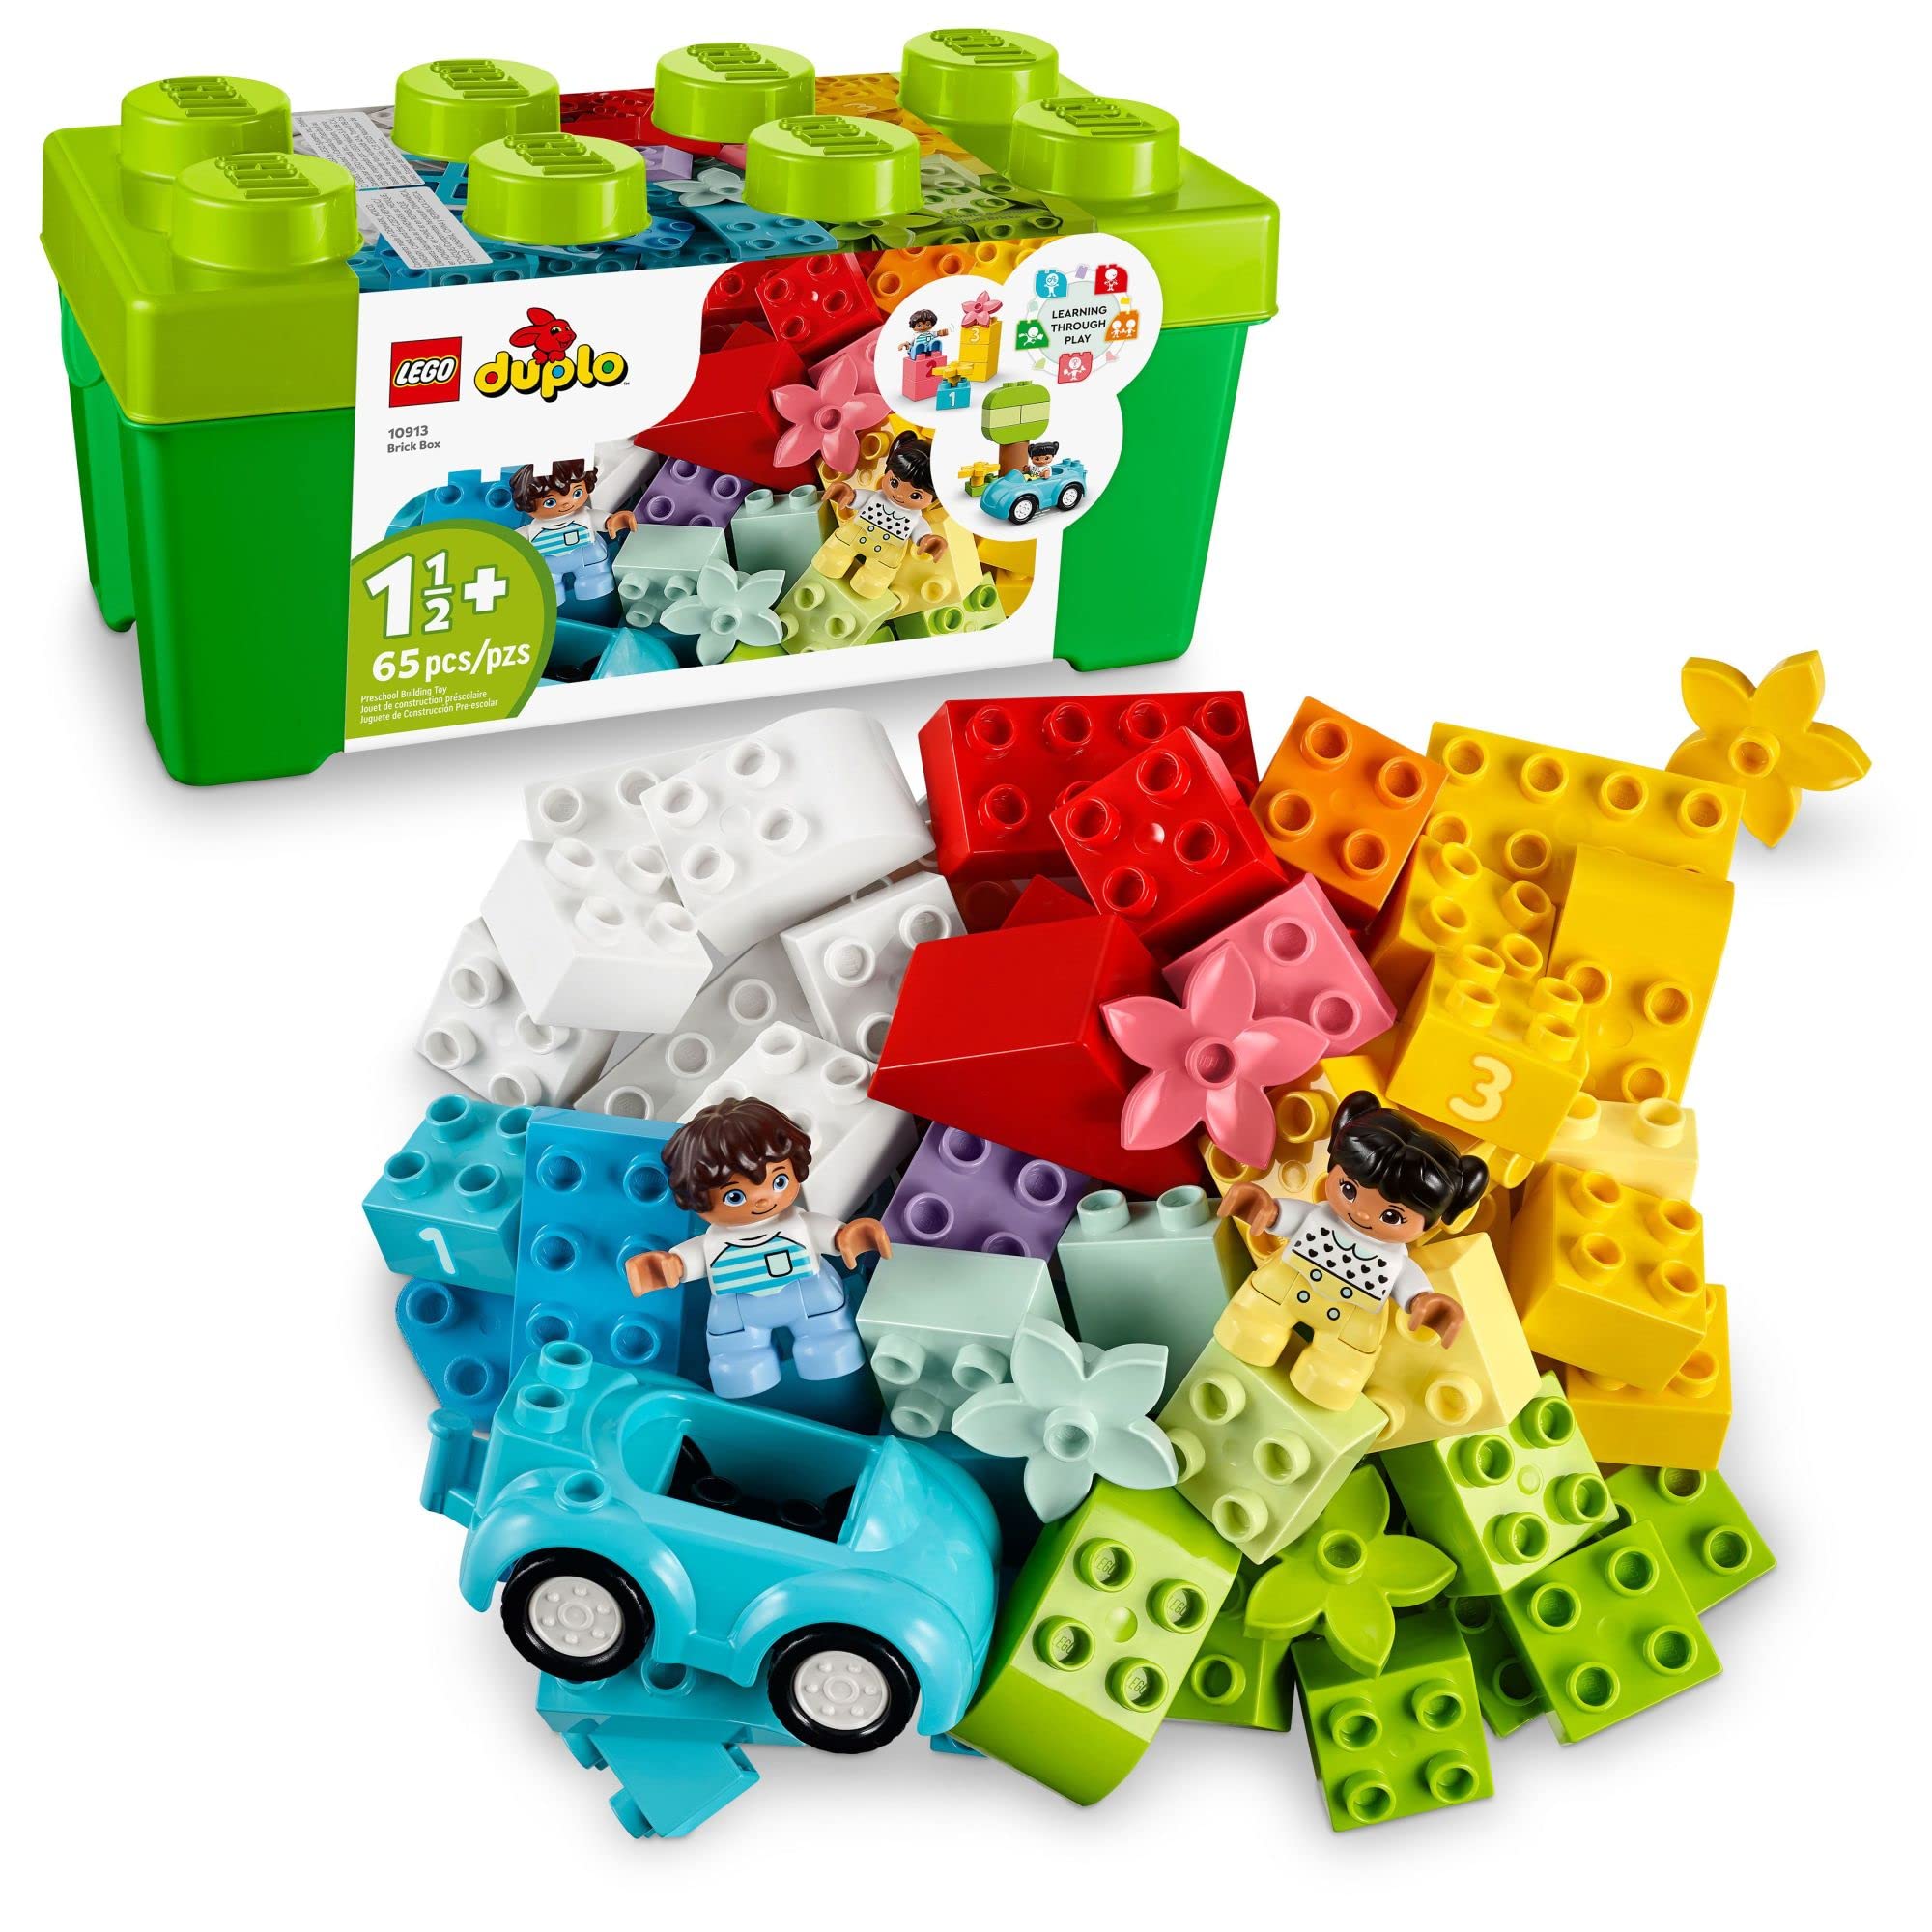 LEGO DUPLO Classic Brick Box Building Set 10913 - Features Storage Organizer, Toy Car, Number Bricks, Build, Learn, and Play, Great Gift Playset for Toddlers, Boys, and Girls Ages 18+ Months